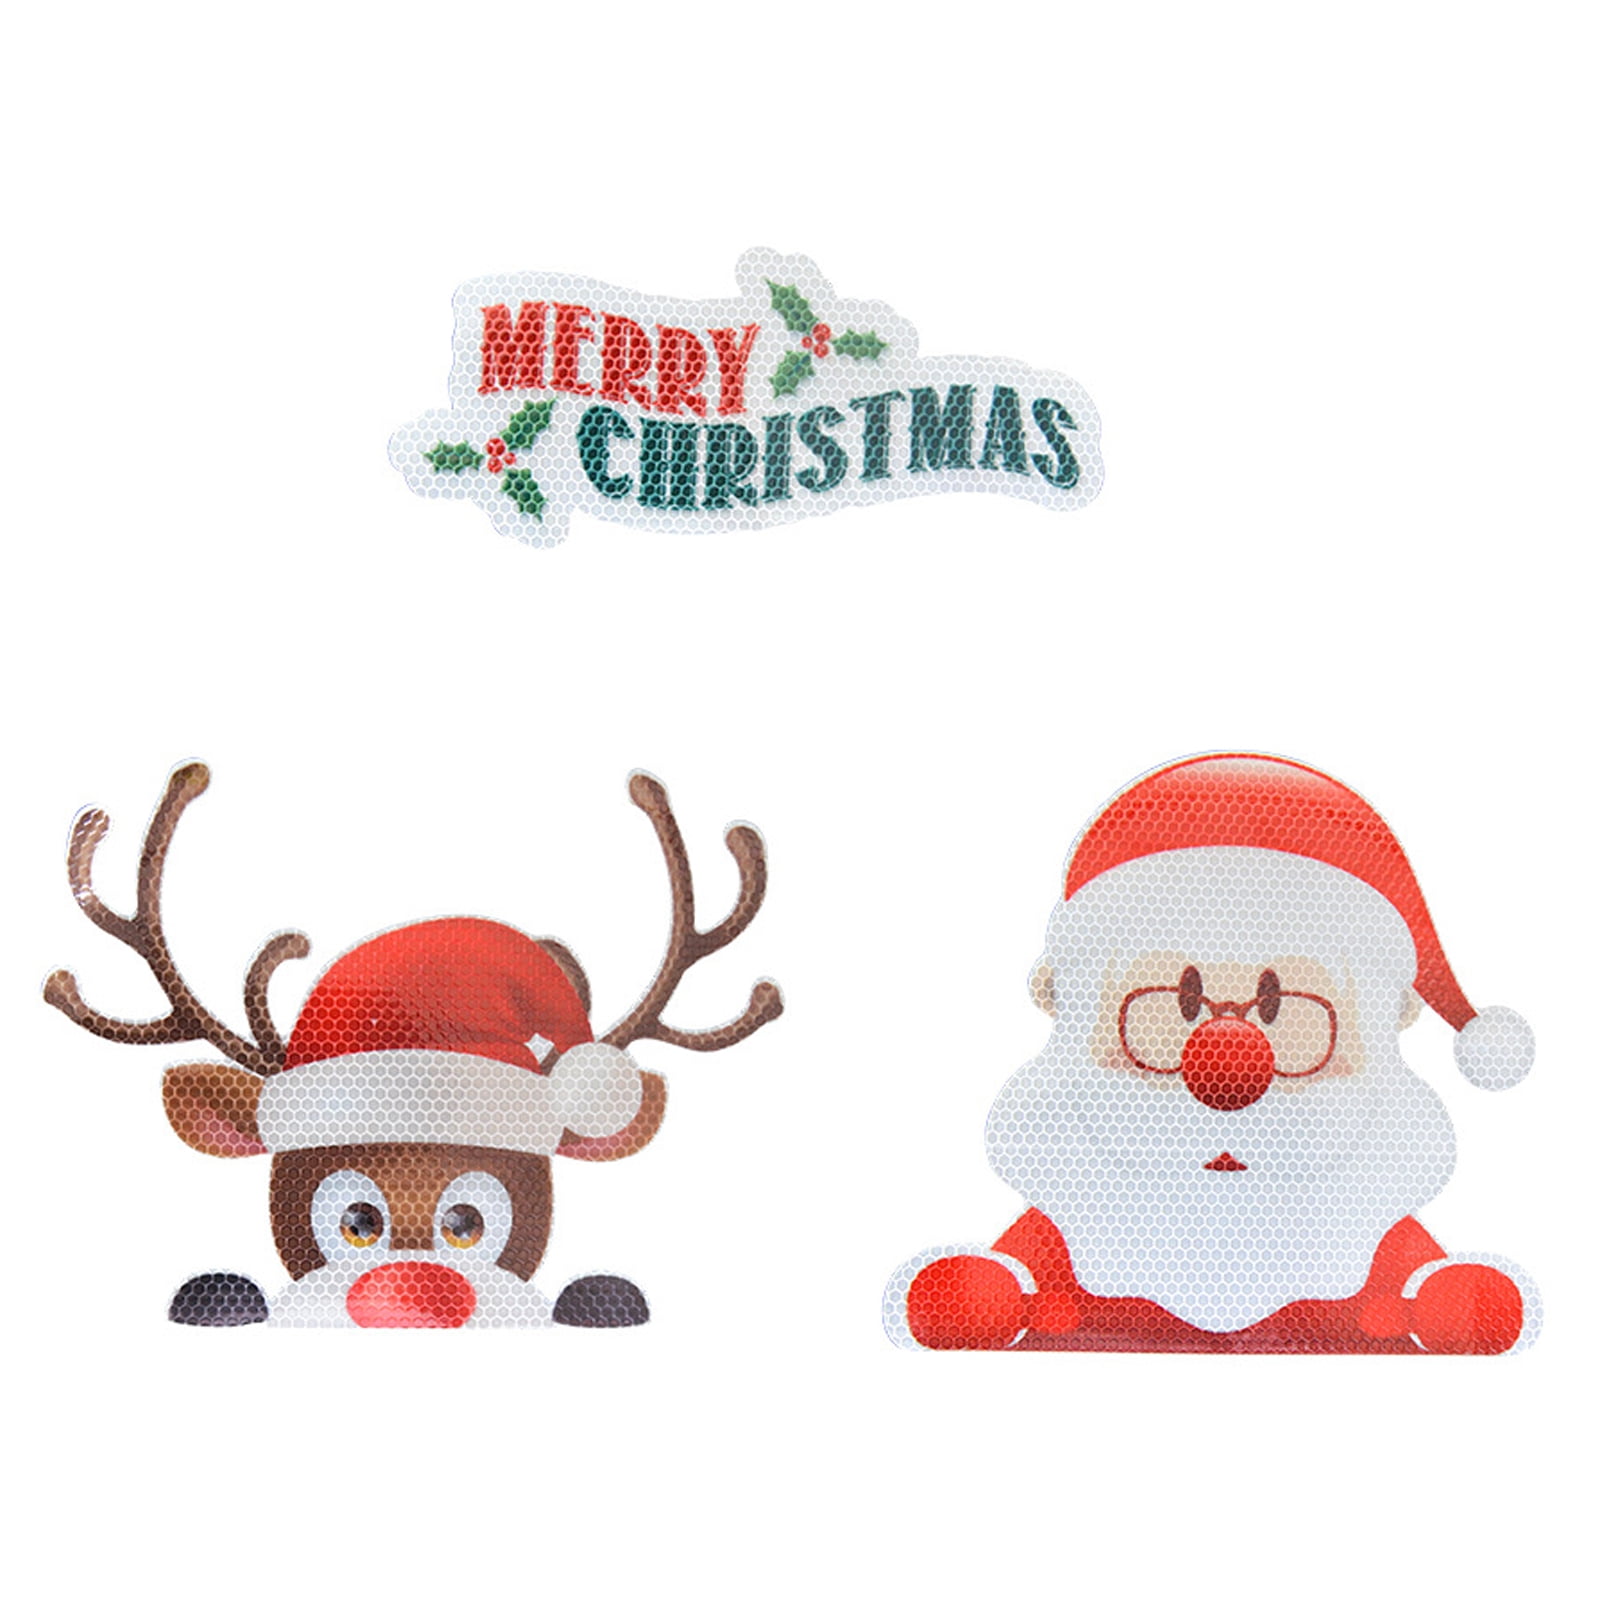 3D Santa Claus Car Rear Window Stickers and Holiday Lights Magnet Set Reflective Christmas Car Decorations Christmas Car Window Decals Christmas Magnets Funny Car Stickers Xmas Window Decals for Car 